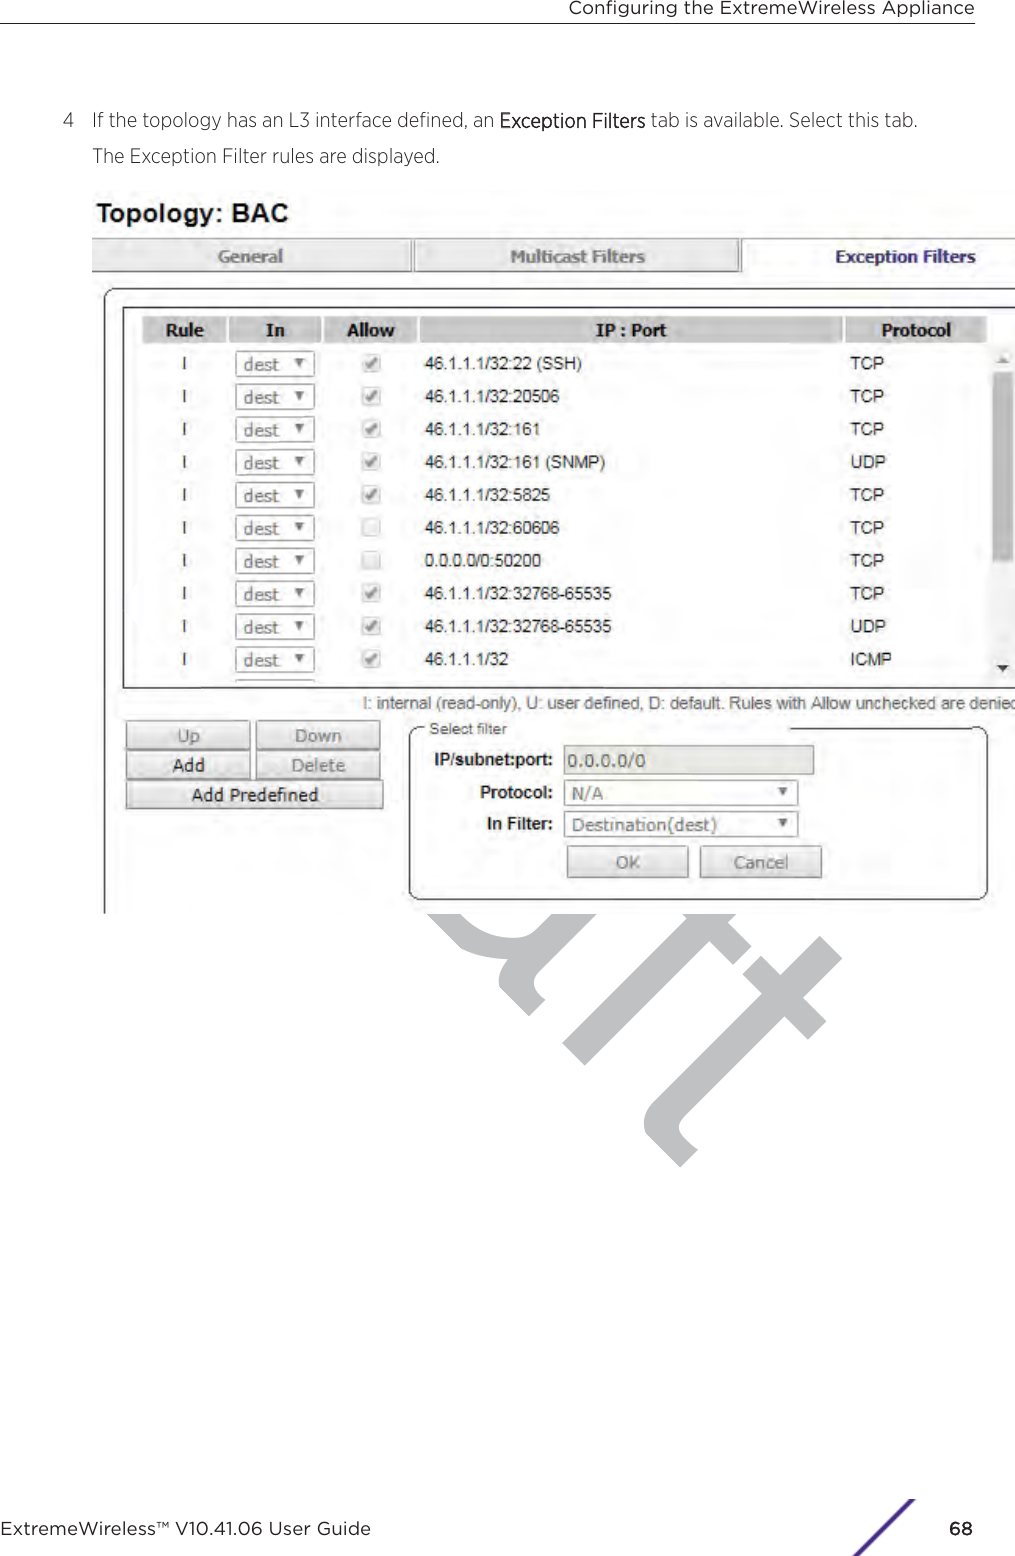 aft4 If the topology has an L3 interface deﬁned, an EException Filters tab is available. Select this tab.The Exception Filter rules are displayed.Conﬁguring the ExtremeWireless ApplianceExtremeWireless™ V10.41.06 User Guide68